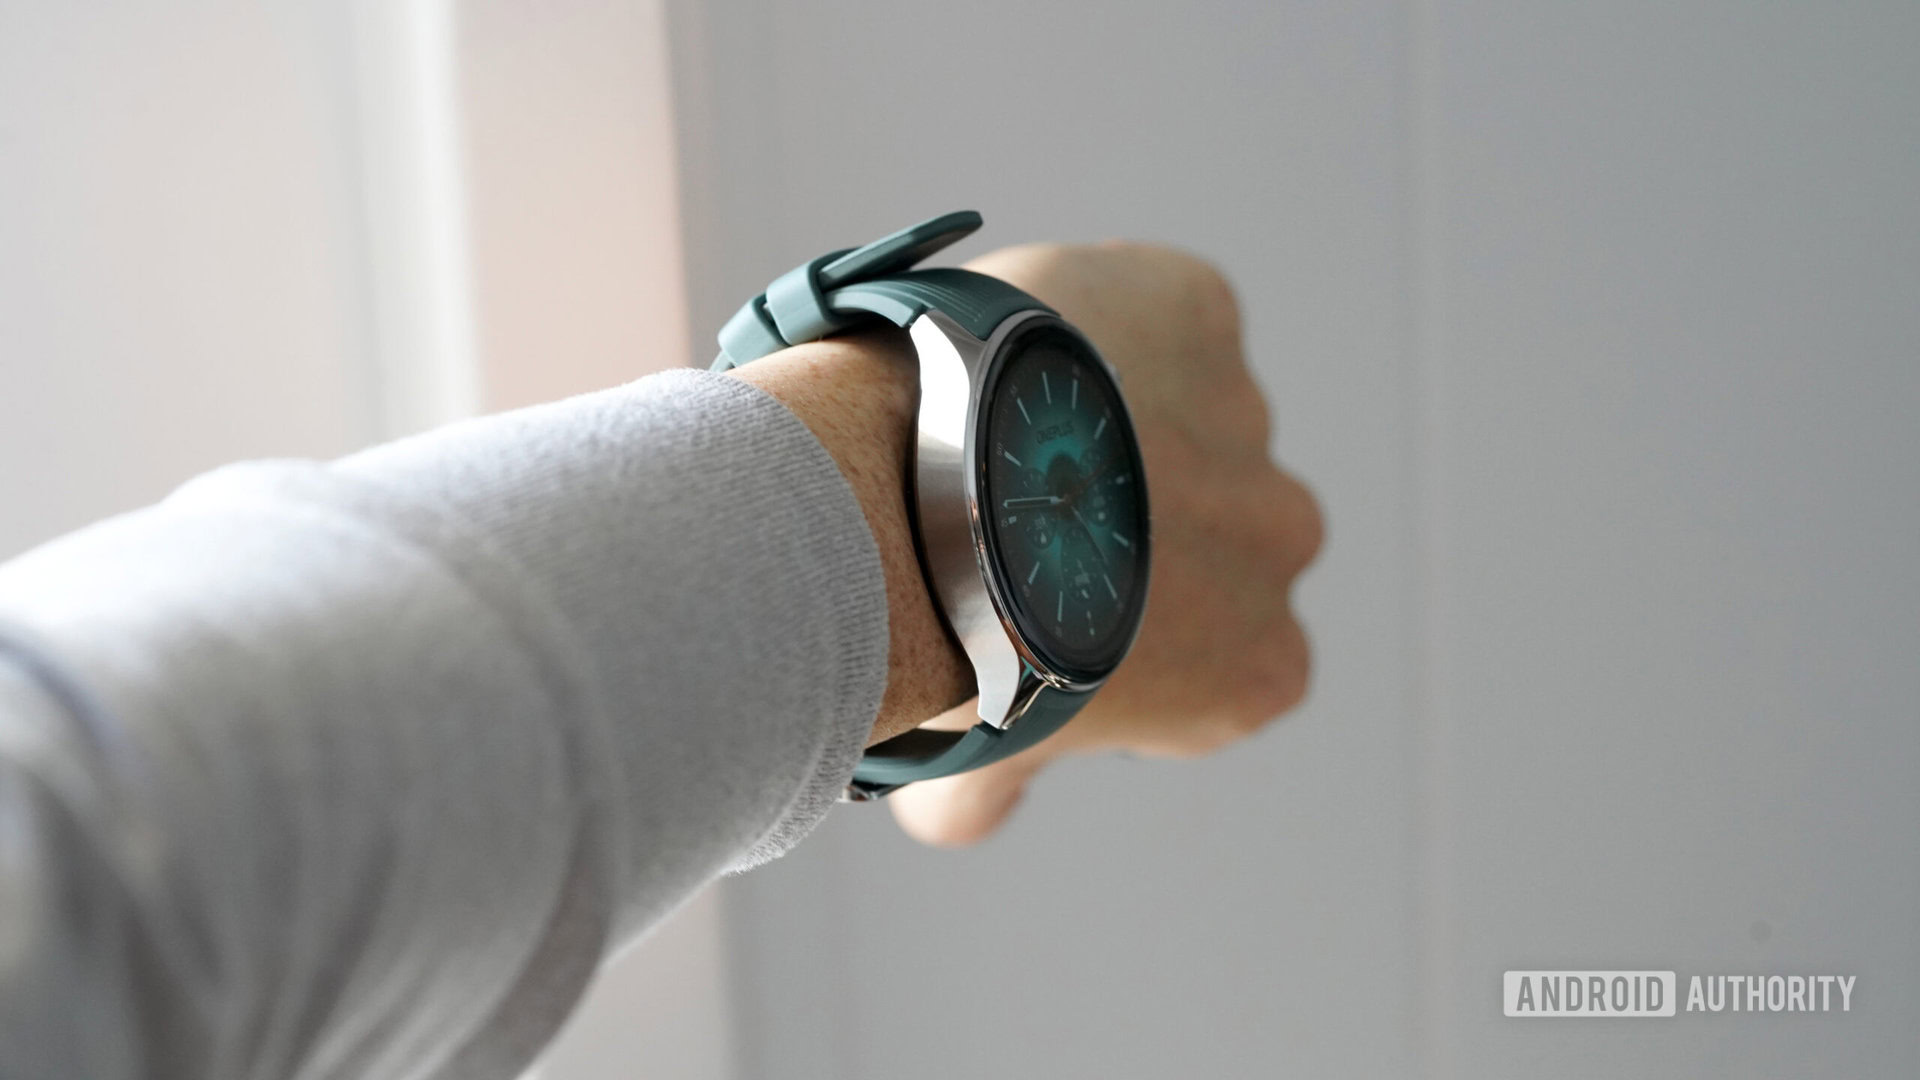 A user wears a OnePlus Watch 2 on their wrist, modeling the device's large lugs and gaping band design.